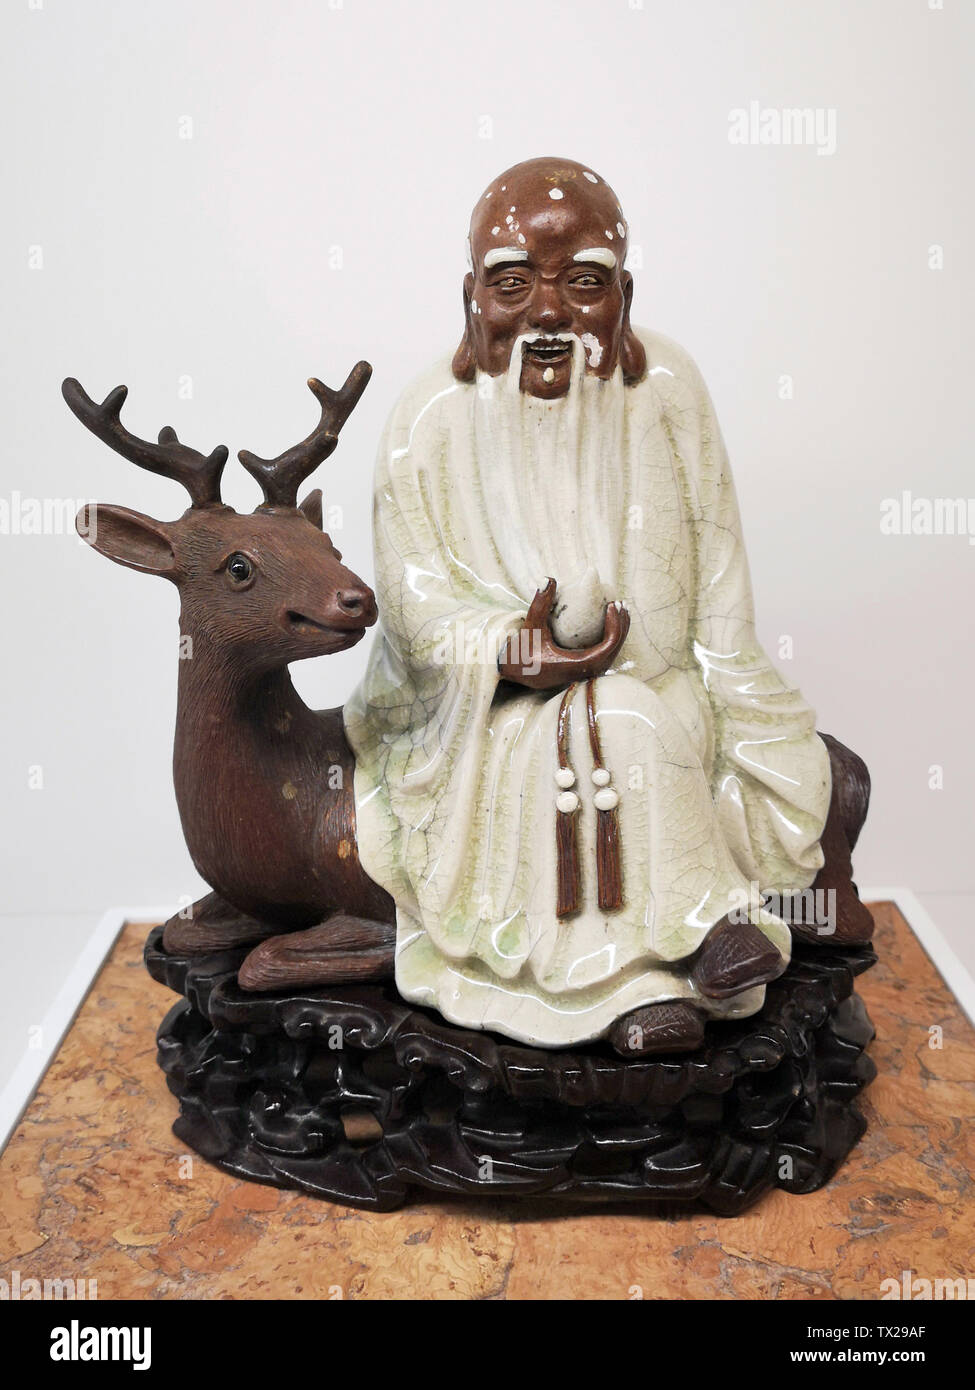 Laozi out of the customs ceramic handicrafts Stock Photo